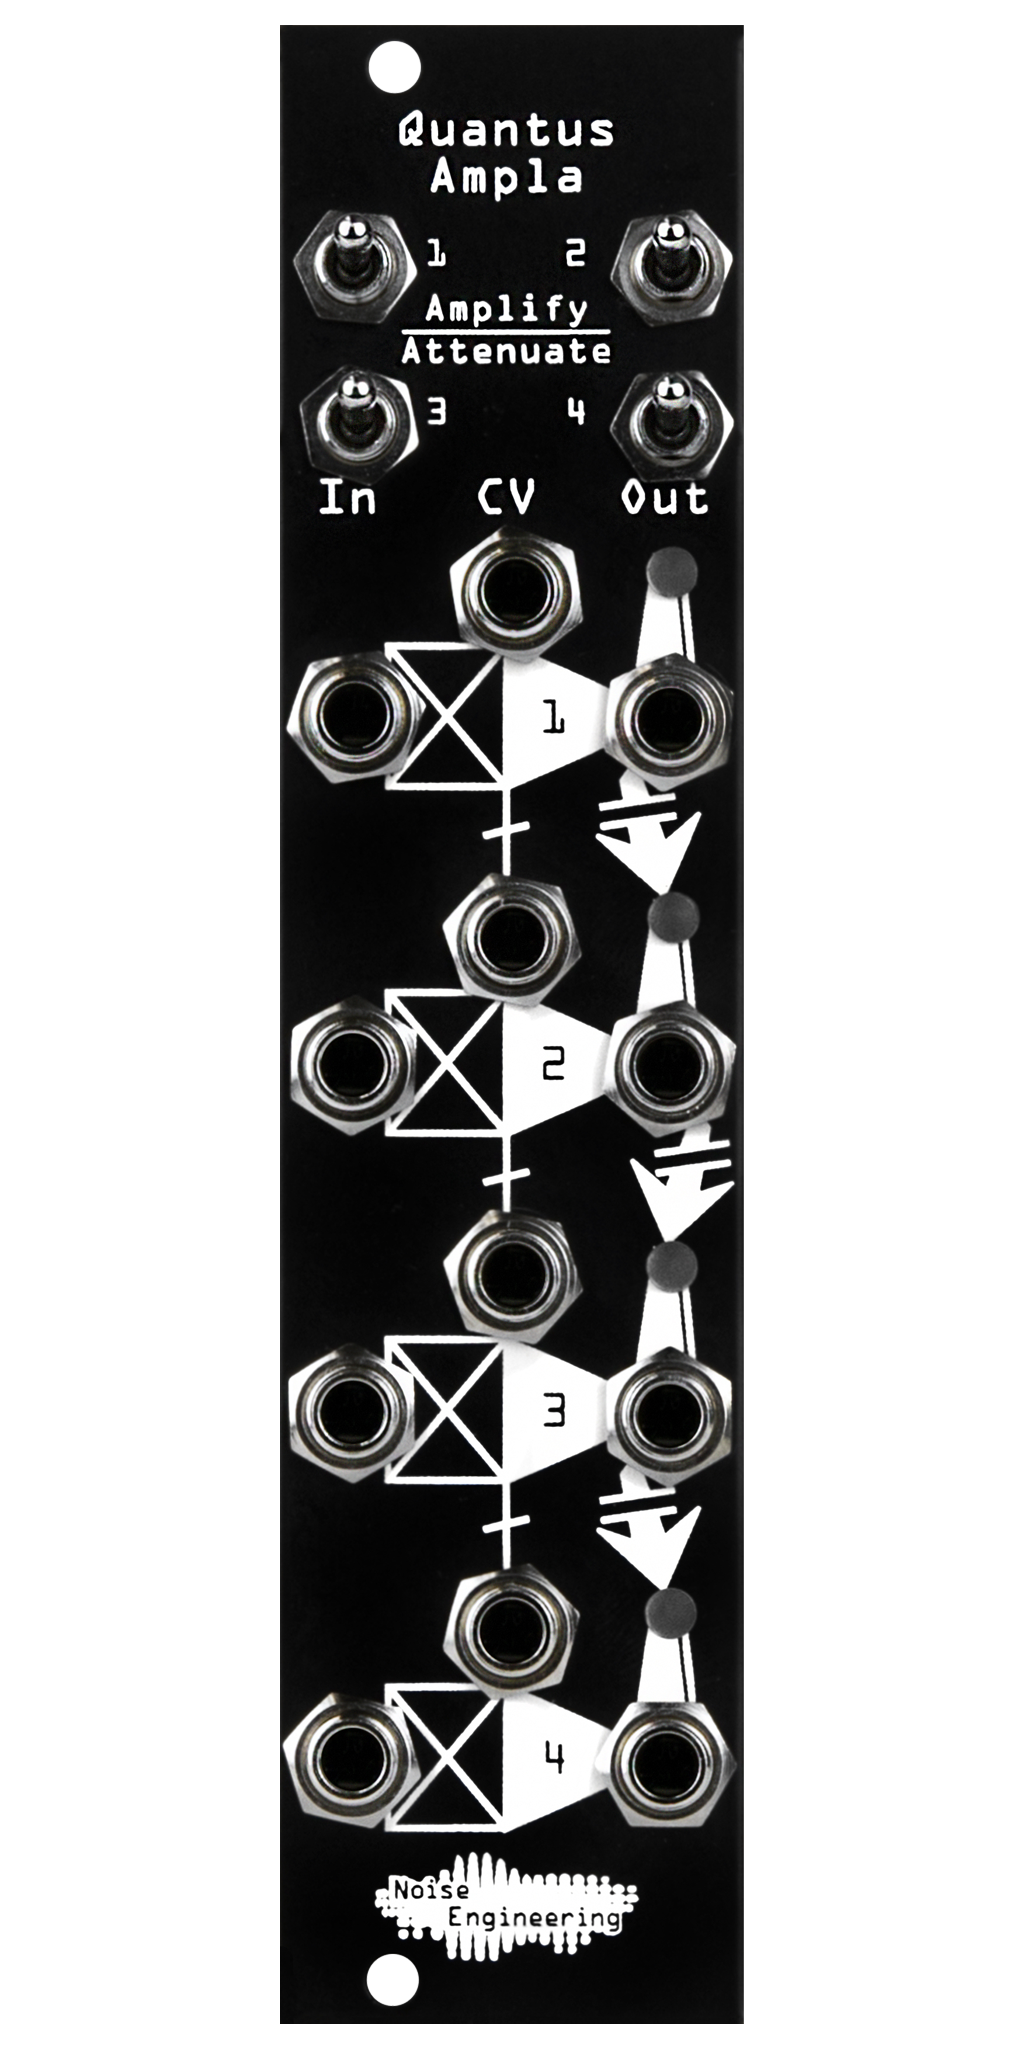 Quantus Ampla black VCA Eurorack module with amplify/attenuate switches at top and jacks on bottom | Noise Engineering